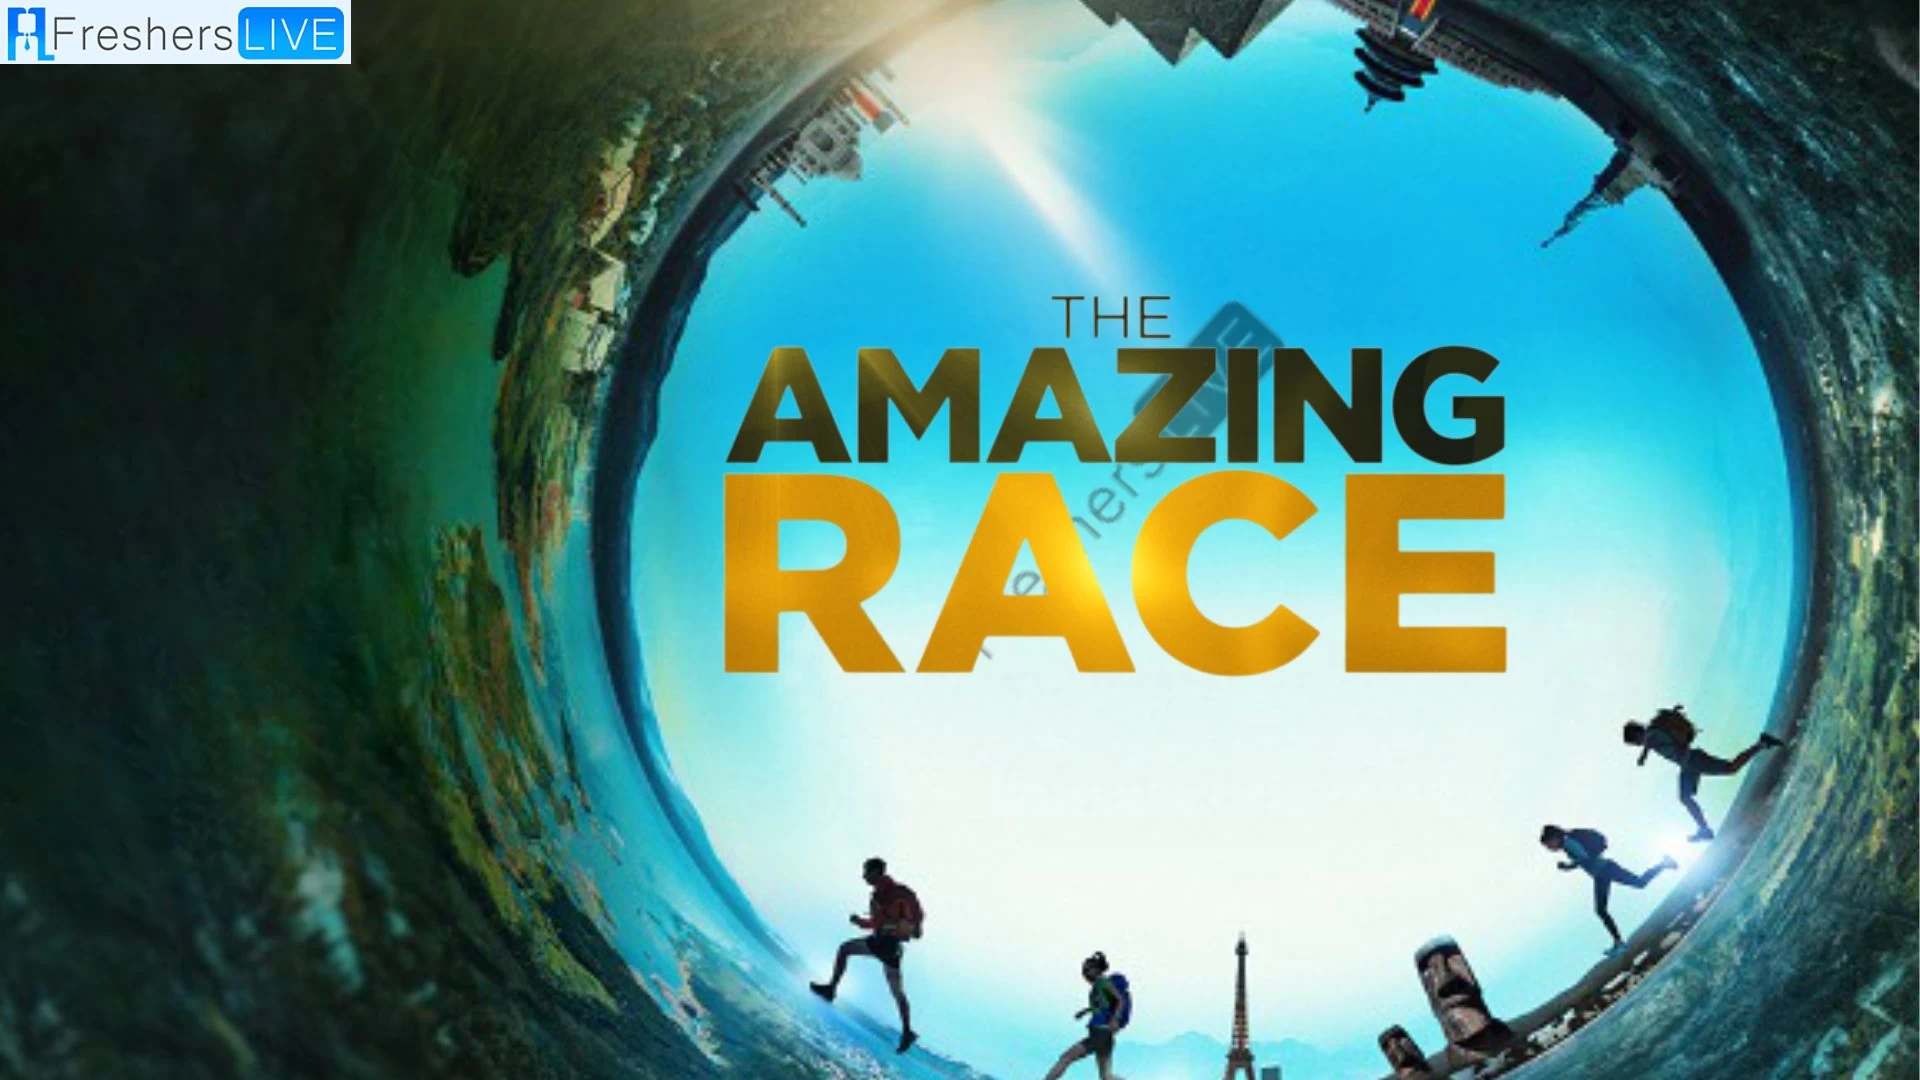 How to Watch The Amazing Race Online 2023? Where to Watch The Amazing Race in 2023?